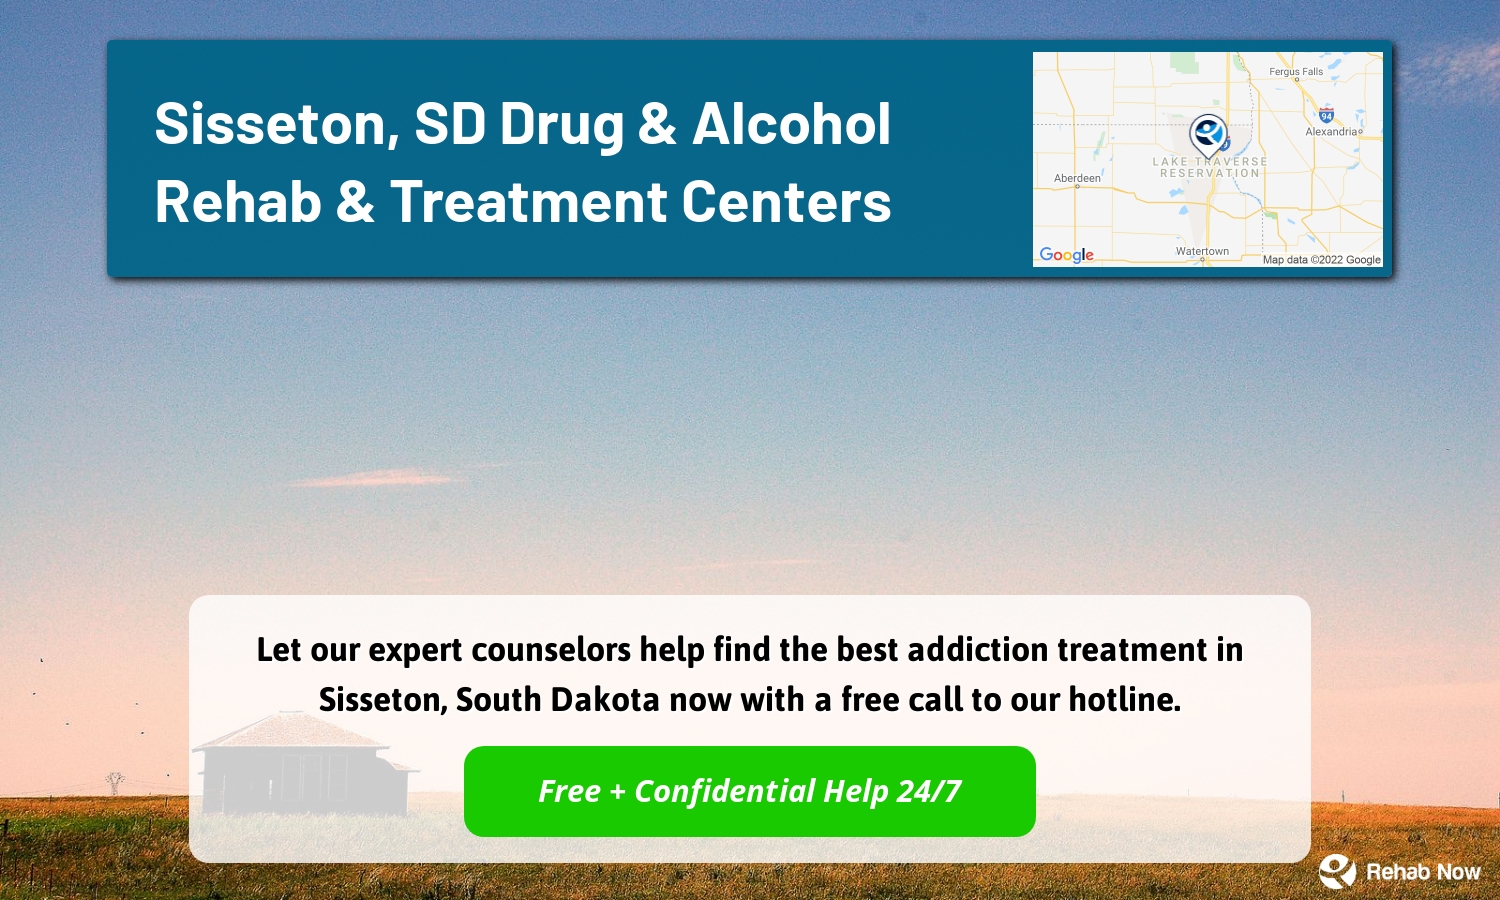 Let our expert counselors help find the best addiction treatment in Sisseton, South Dakota now with a free call to our hotline.